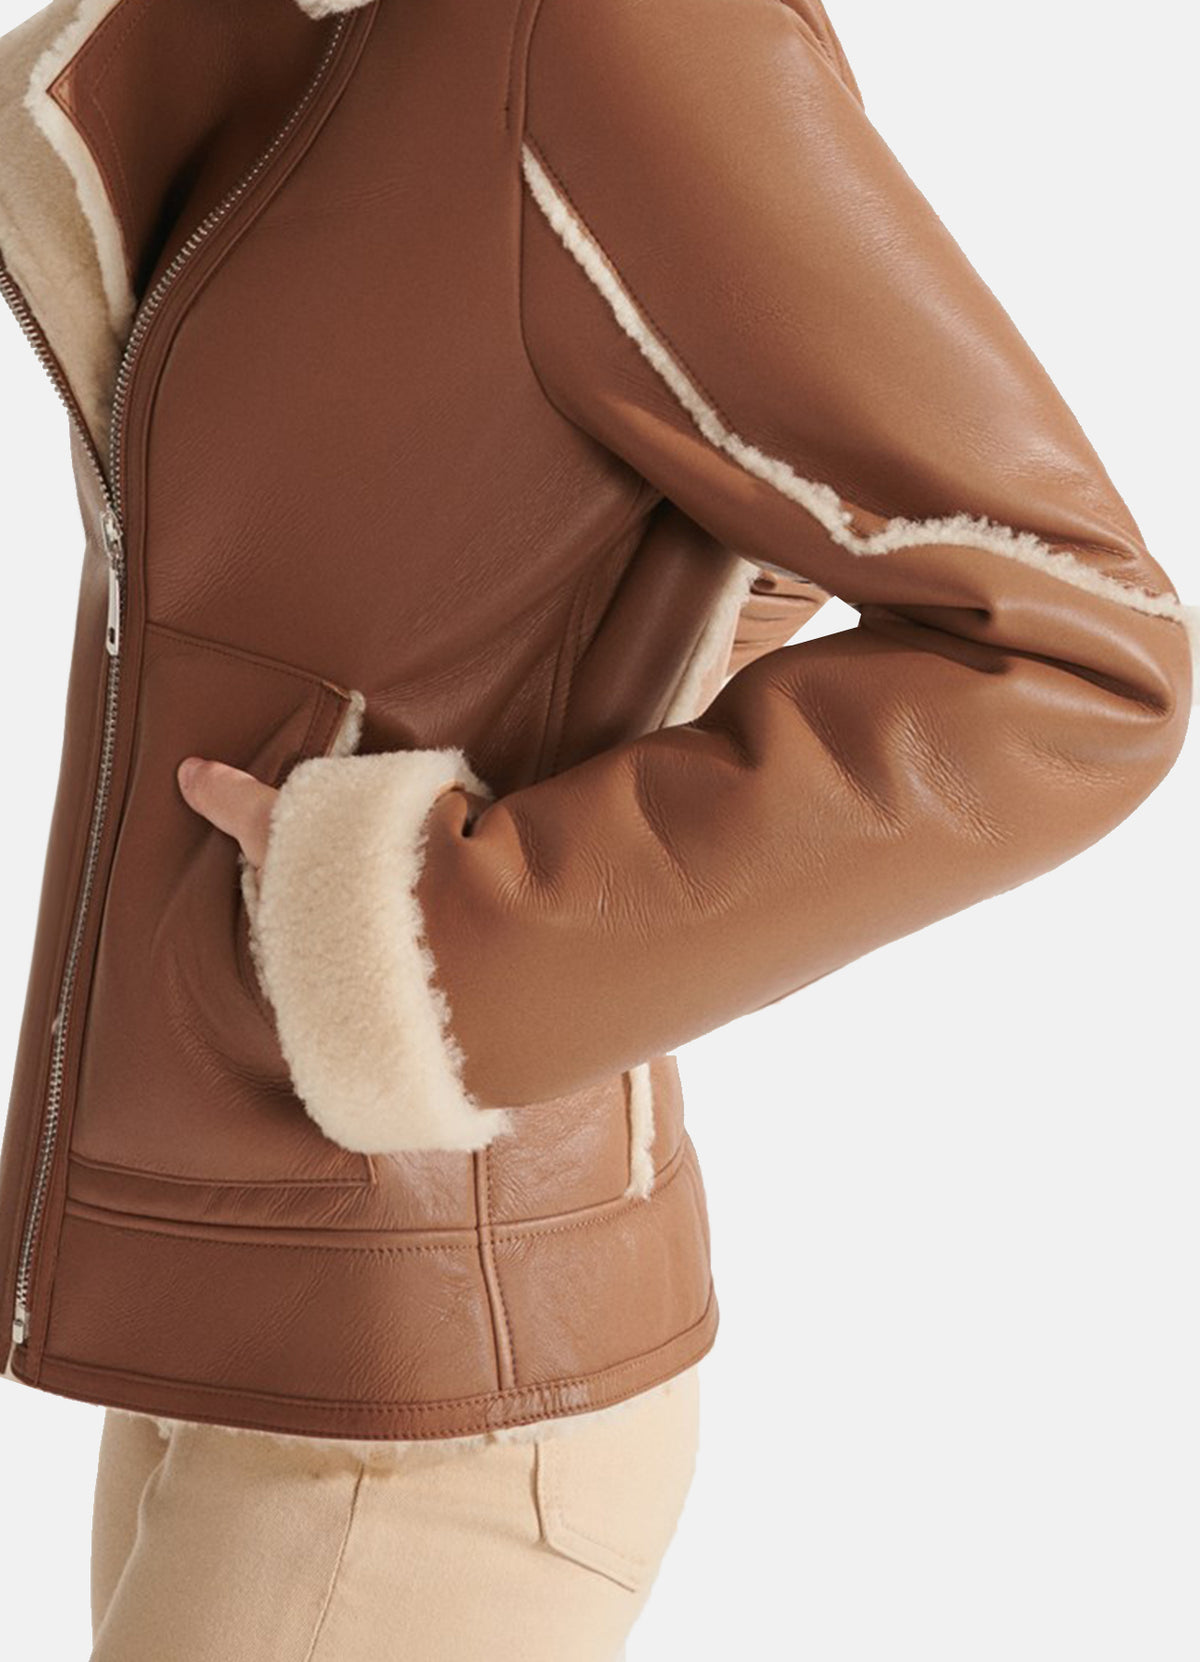 Womens TAN Sports Shearling Leather Jacket